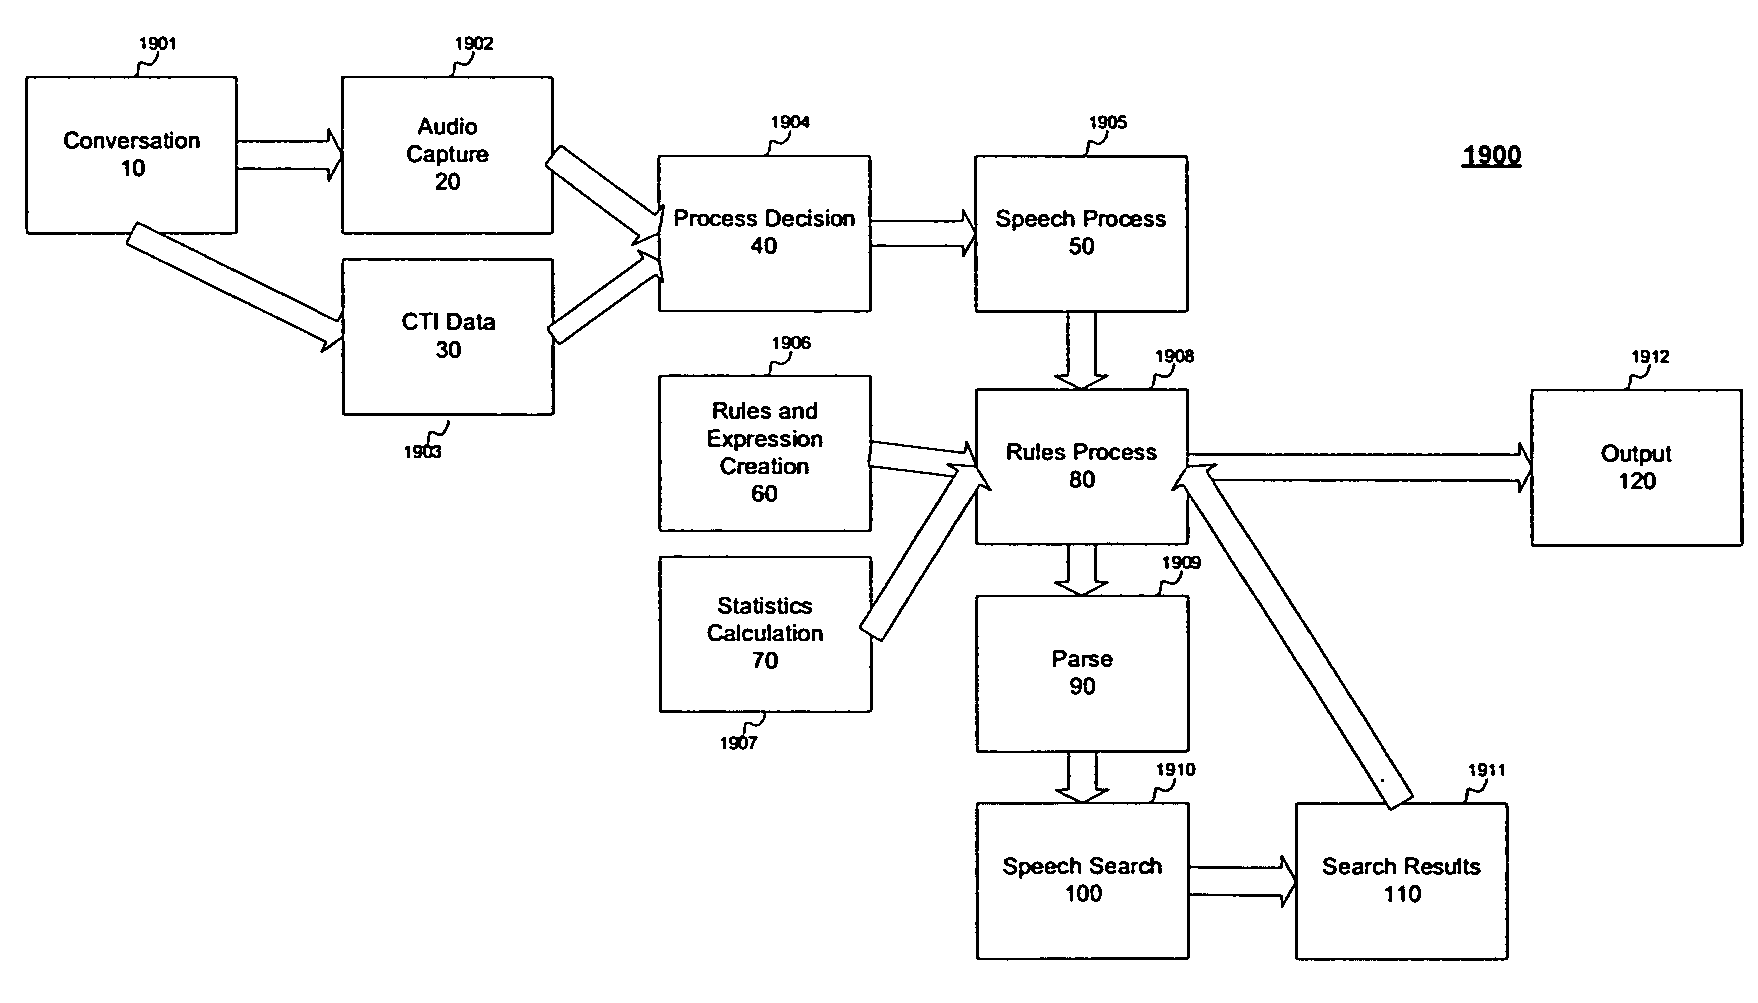 System for and method of automated quality monitoring